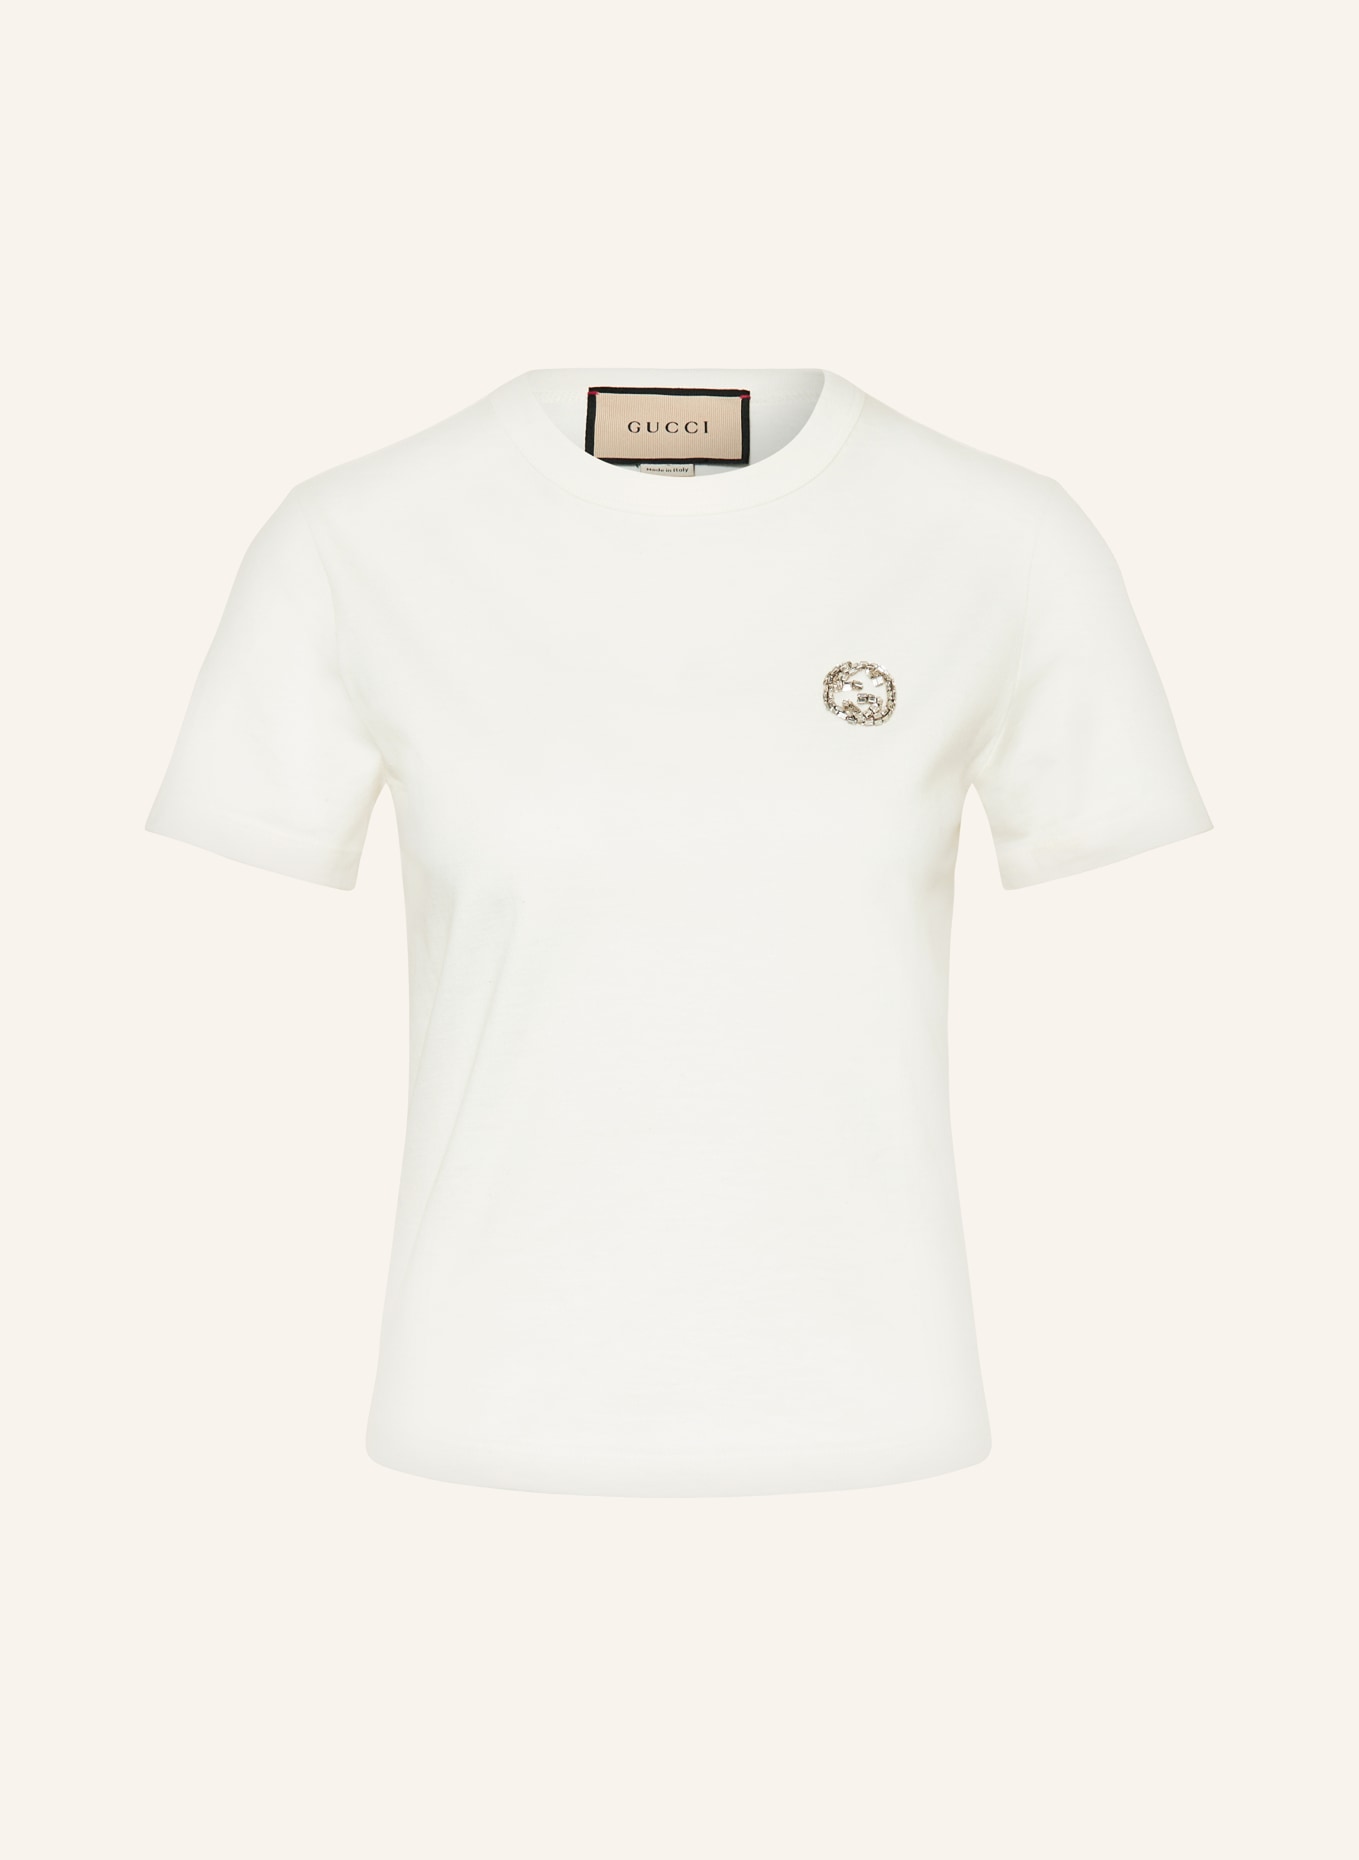 GUCCI T-shirt with decorative gems, Color: LIGHT YELLOW (Image 1)